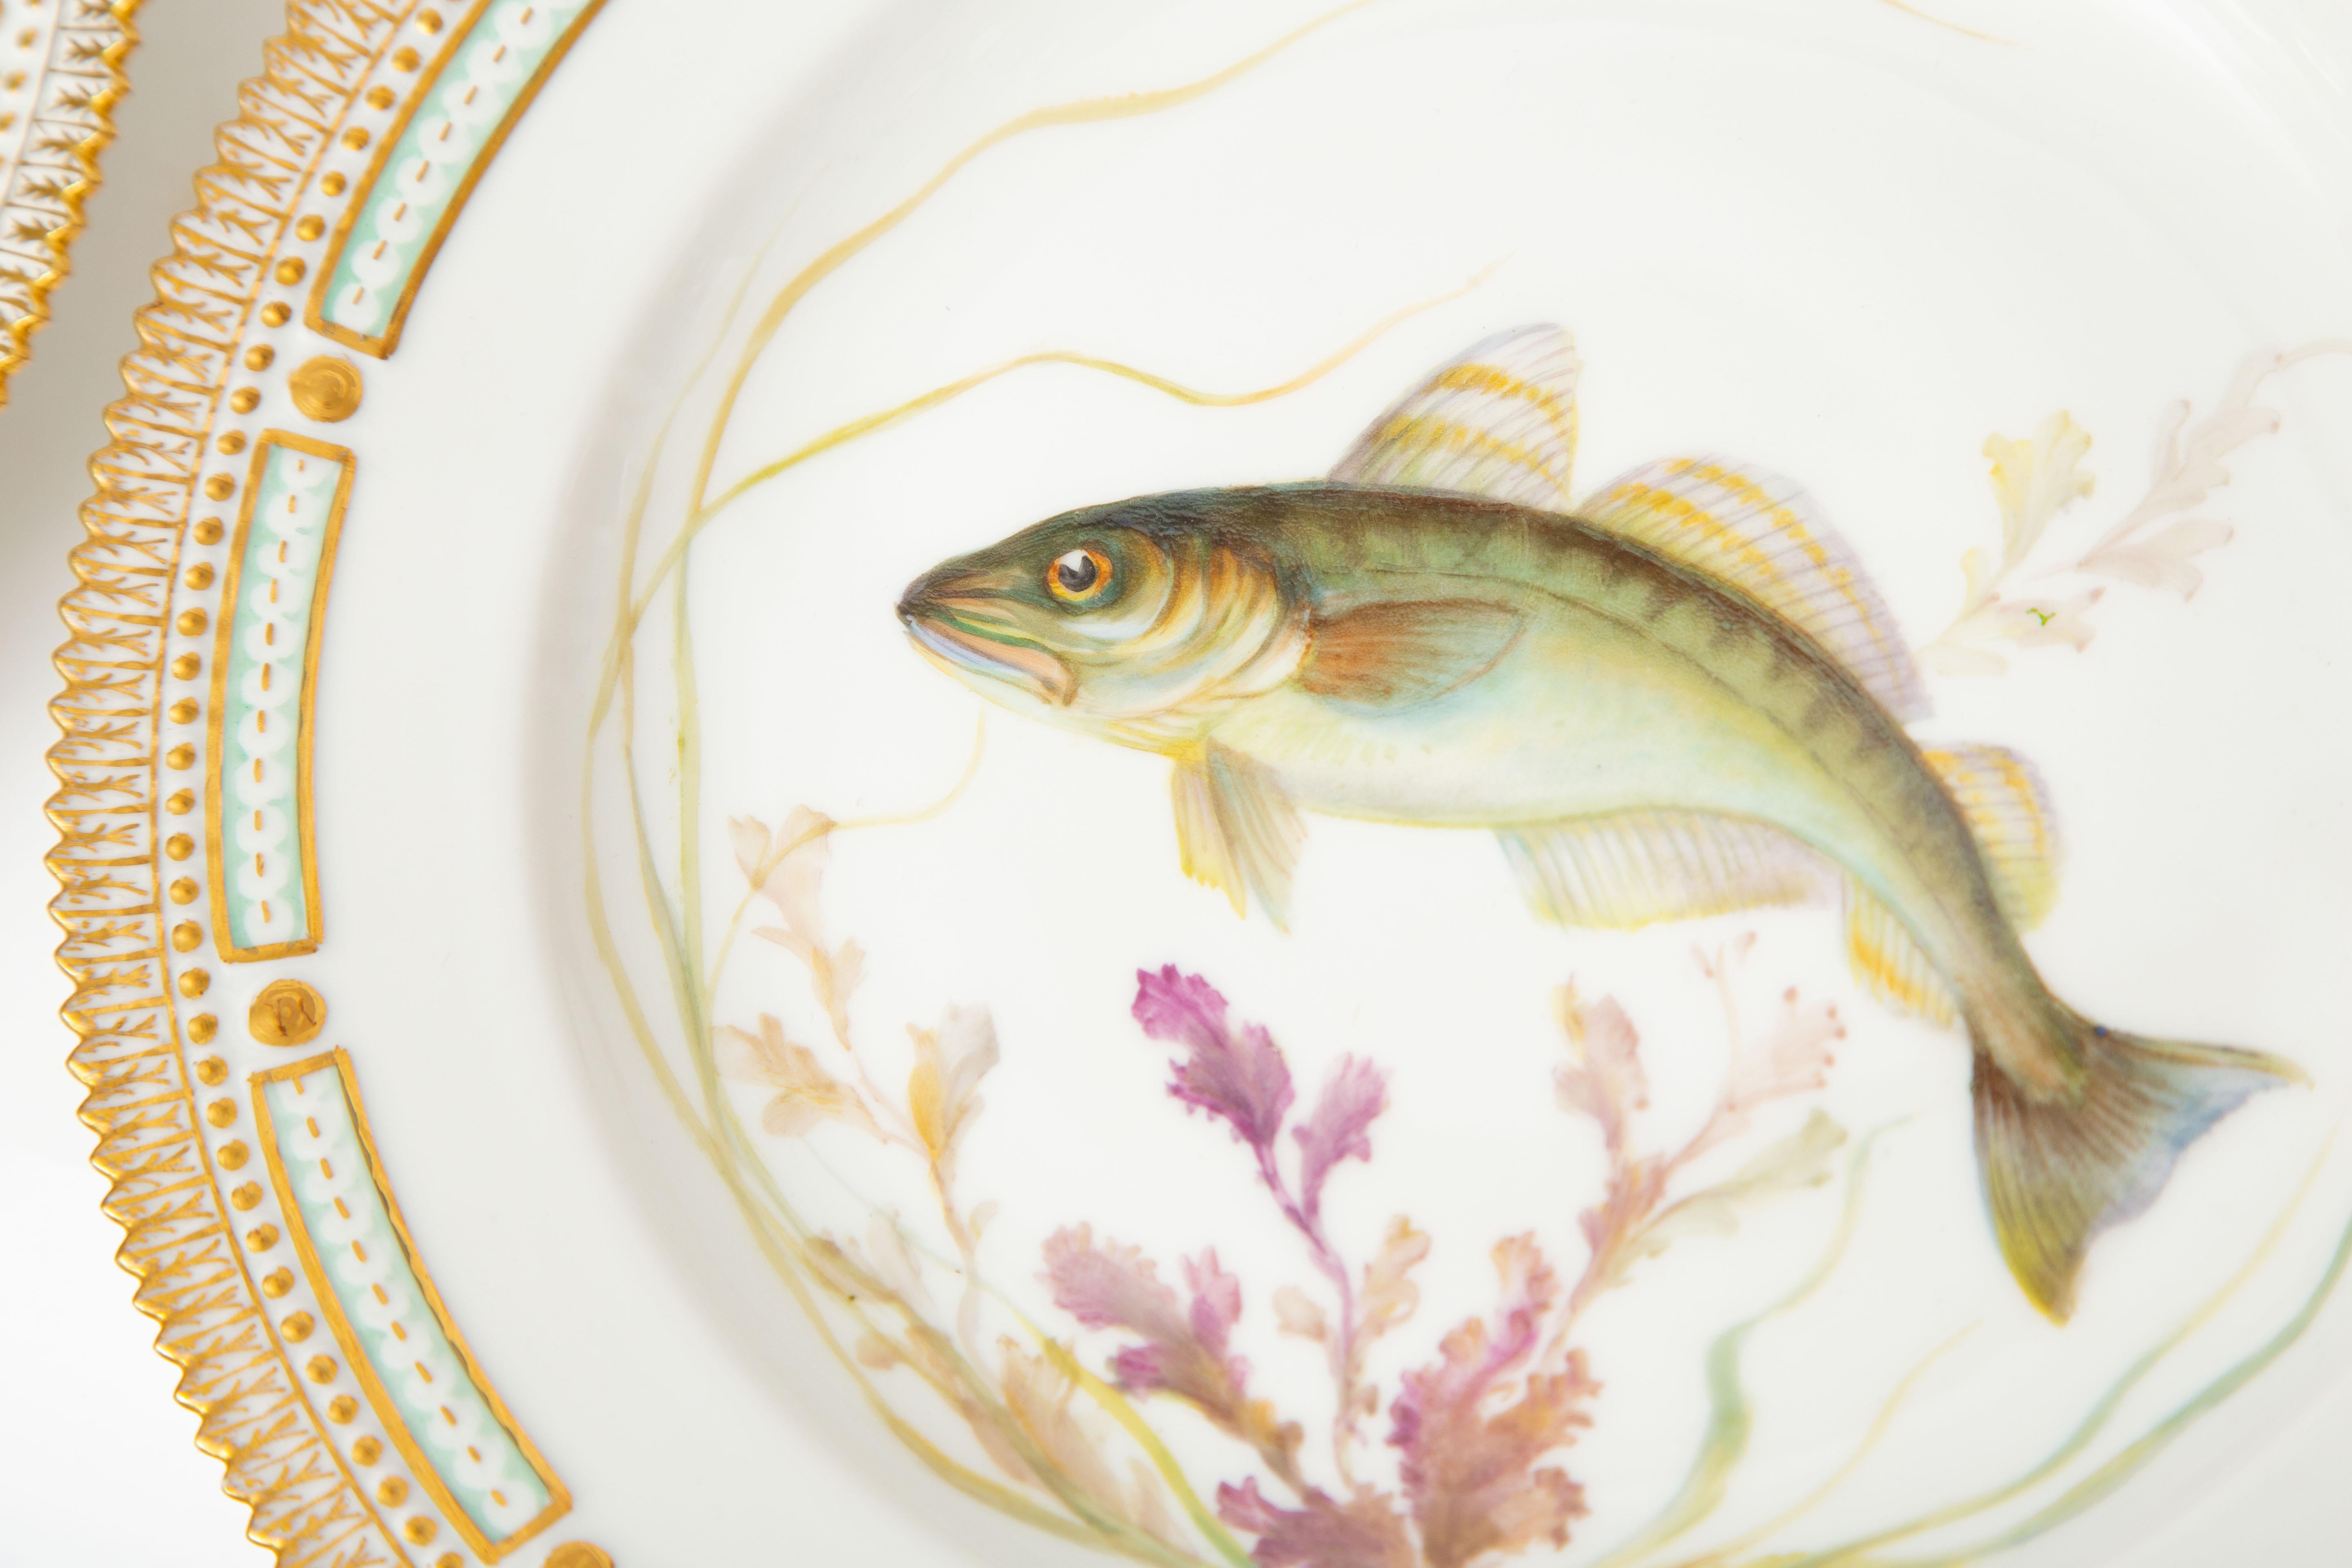 Gold 12 Flora Danica Fish Plates, Vintage and Vibrantly Painted, Royal Copenhagen For Sale